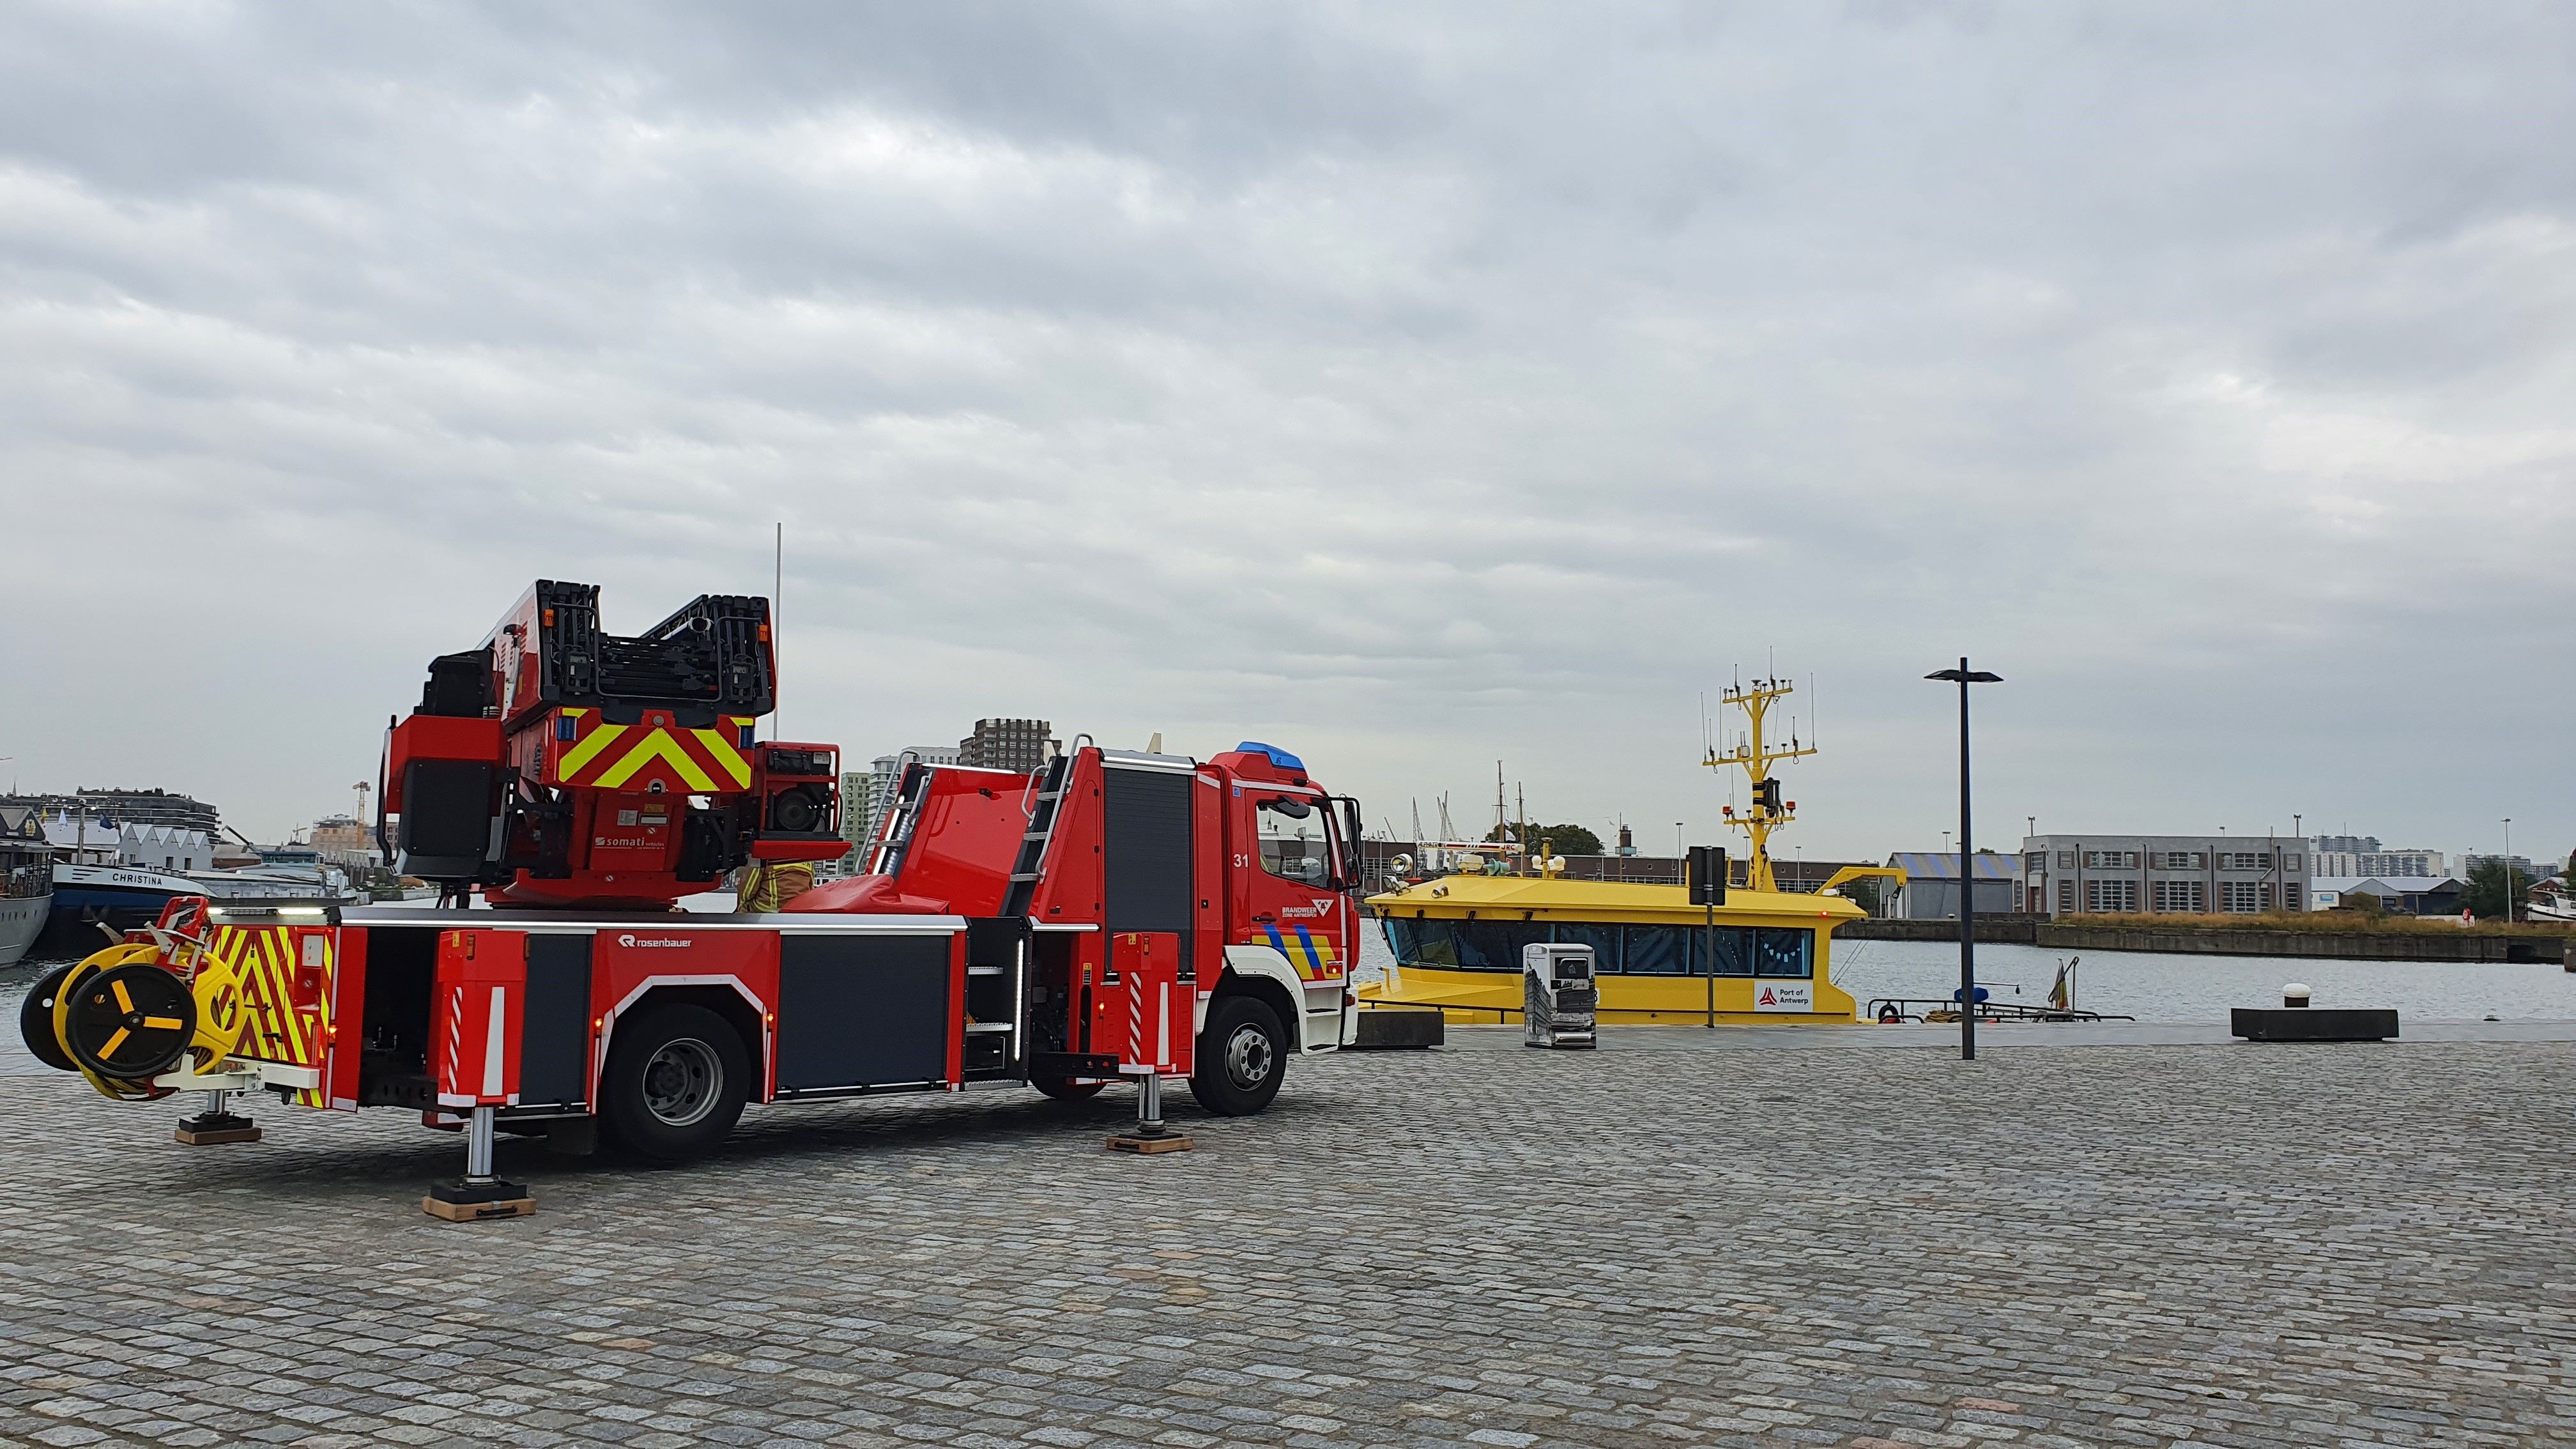 During a live demonstration, video images were shown via the 5G network from a police combi, a fire truck and a sounding boat from Port of Antwerp.